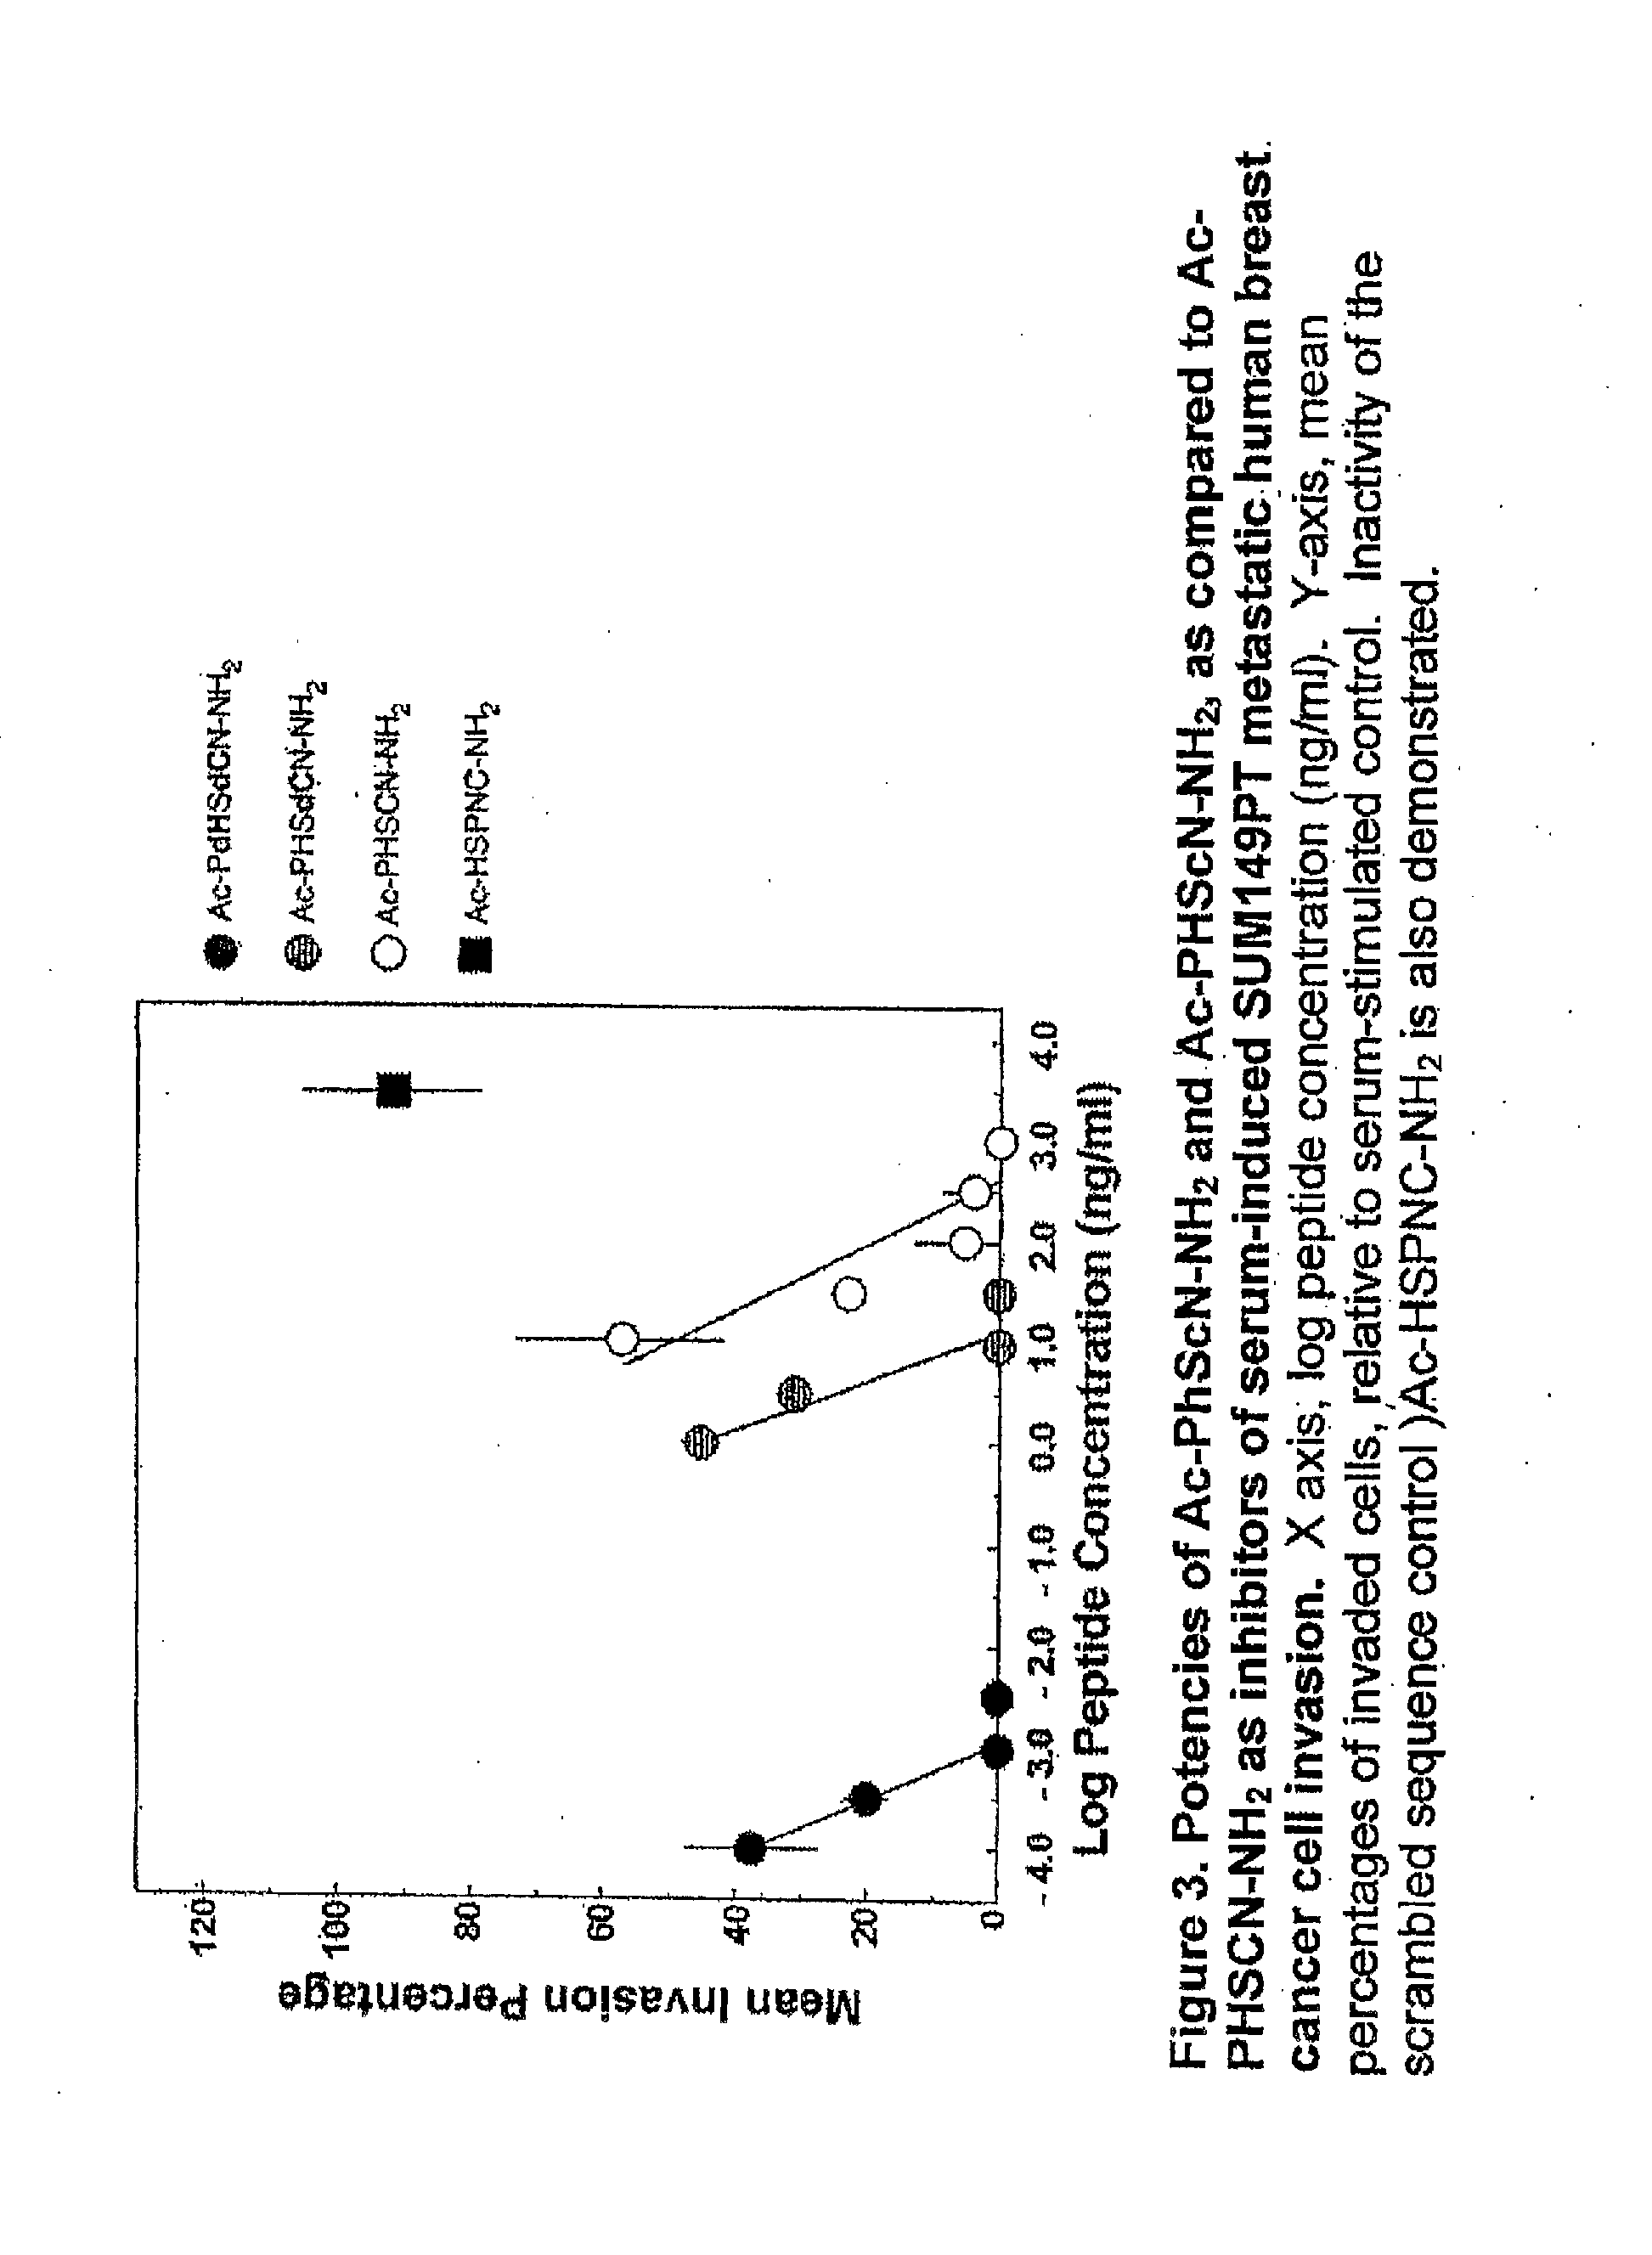 Compounds For, and Methods of, Treating Cancer and Inhibiting Invasion and Metastases